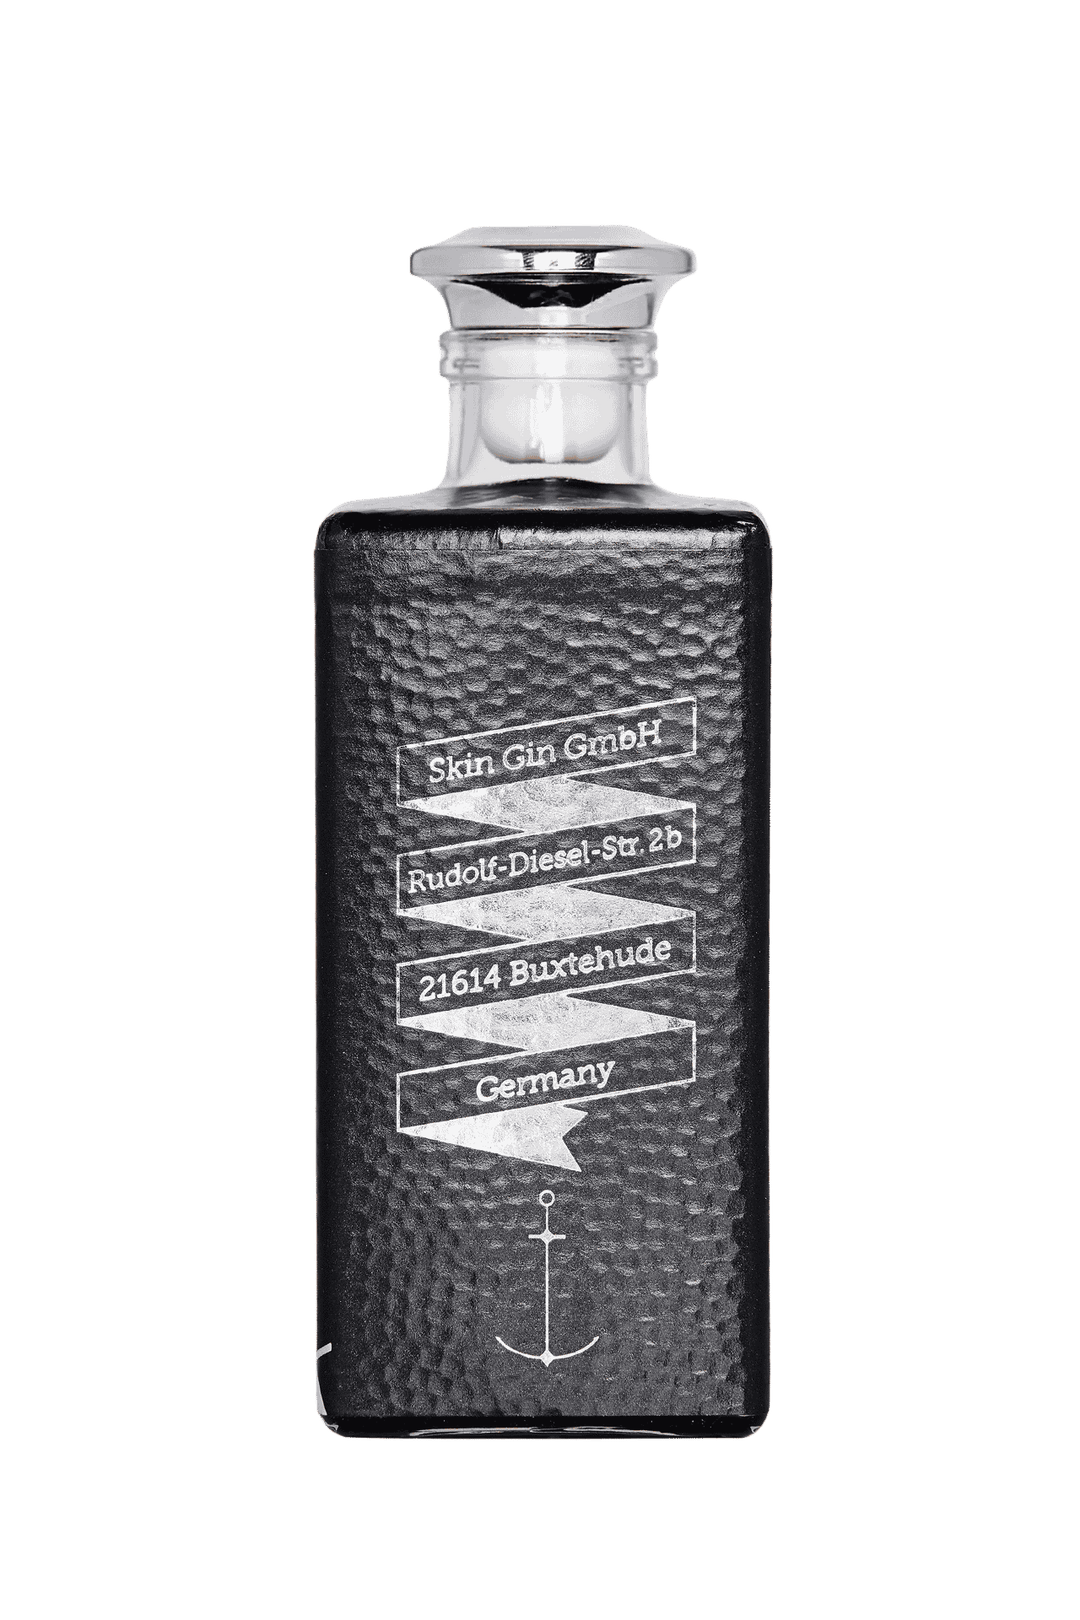 Skin Gin Revier Edition